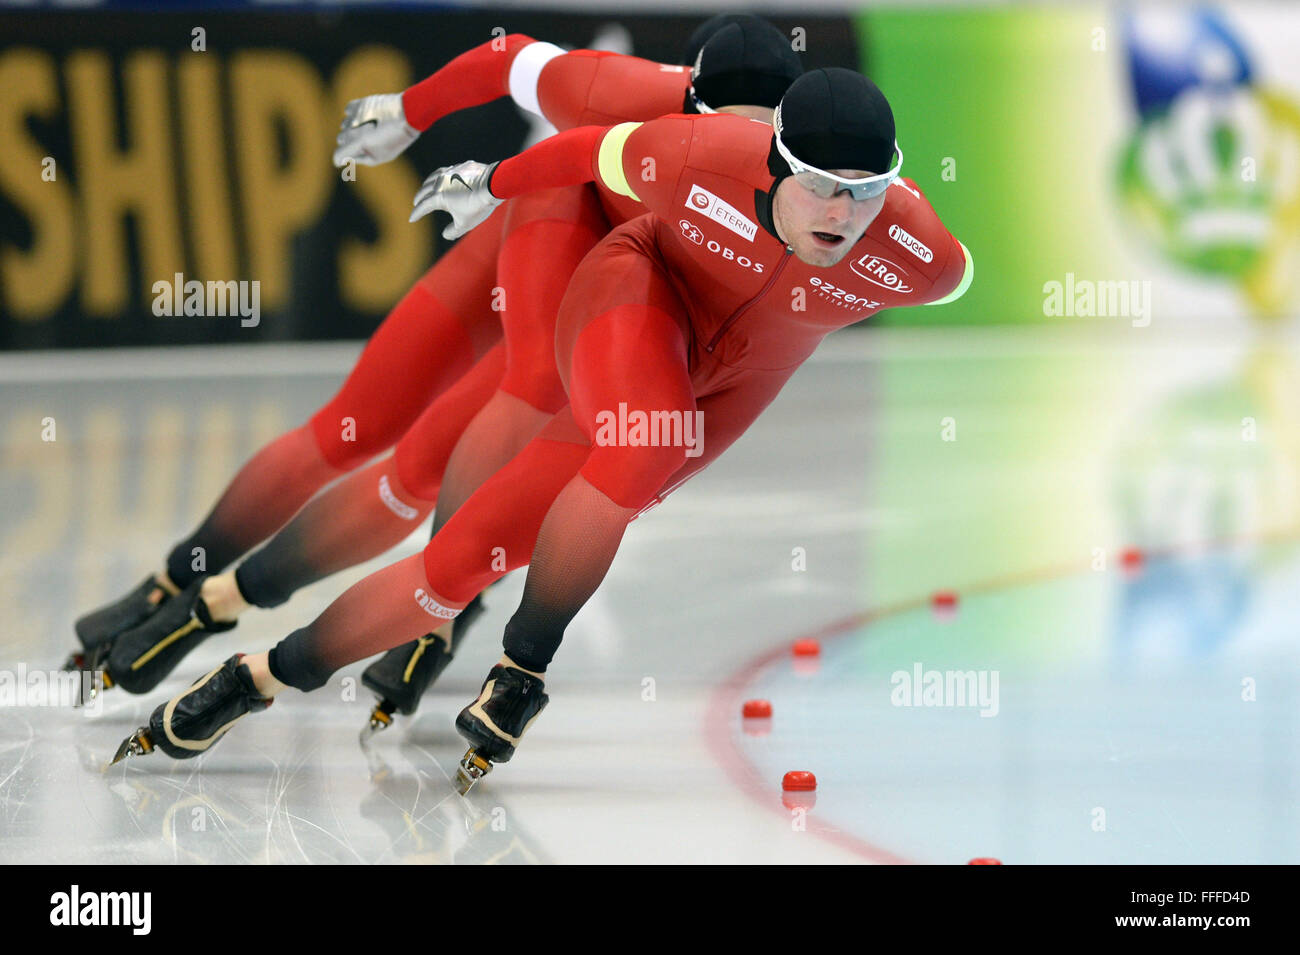 Kolomna, Russia. 12th Feb, 2016. Havard Bokko, Simen Spieler Nilsen and Sverre Lunde Pedersen of Norway (L to R) competes during the men's team pursuit race at 2016 ISU World Single Distances Championships in Kolomna, Russia, on Feb. 12, 2016. The team of Norway took the second place of the event in 3 minutes and 41.26 seconds. Credit:  Pavel Bednyakov/Xinhua/Alamy Live News Stock Photo